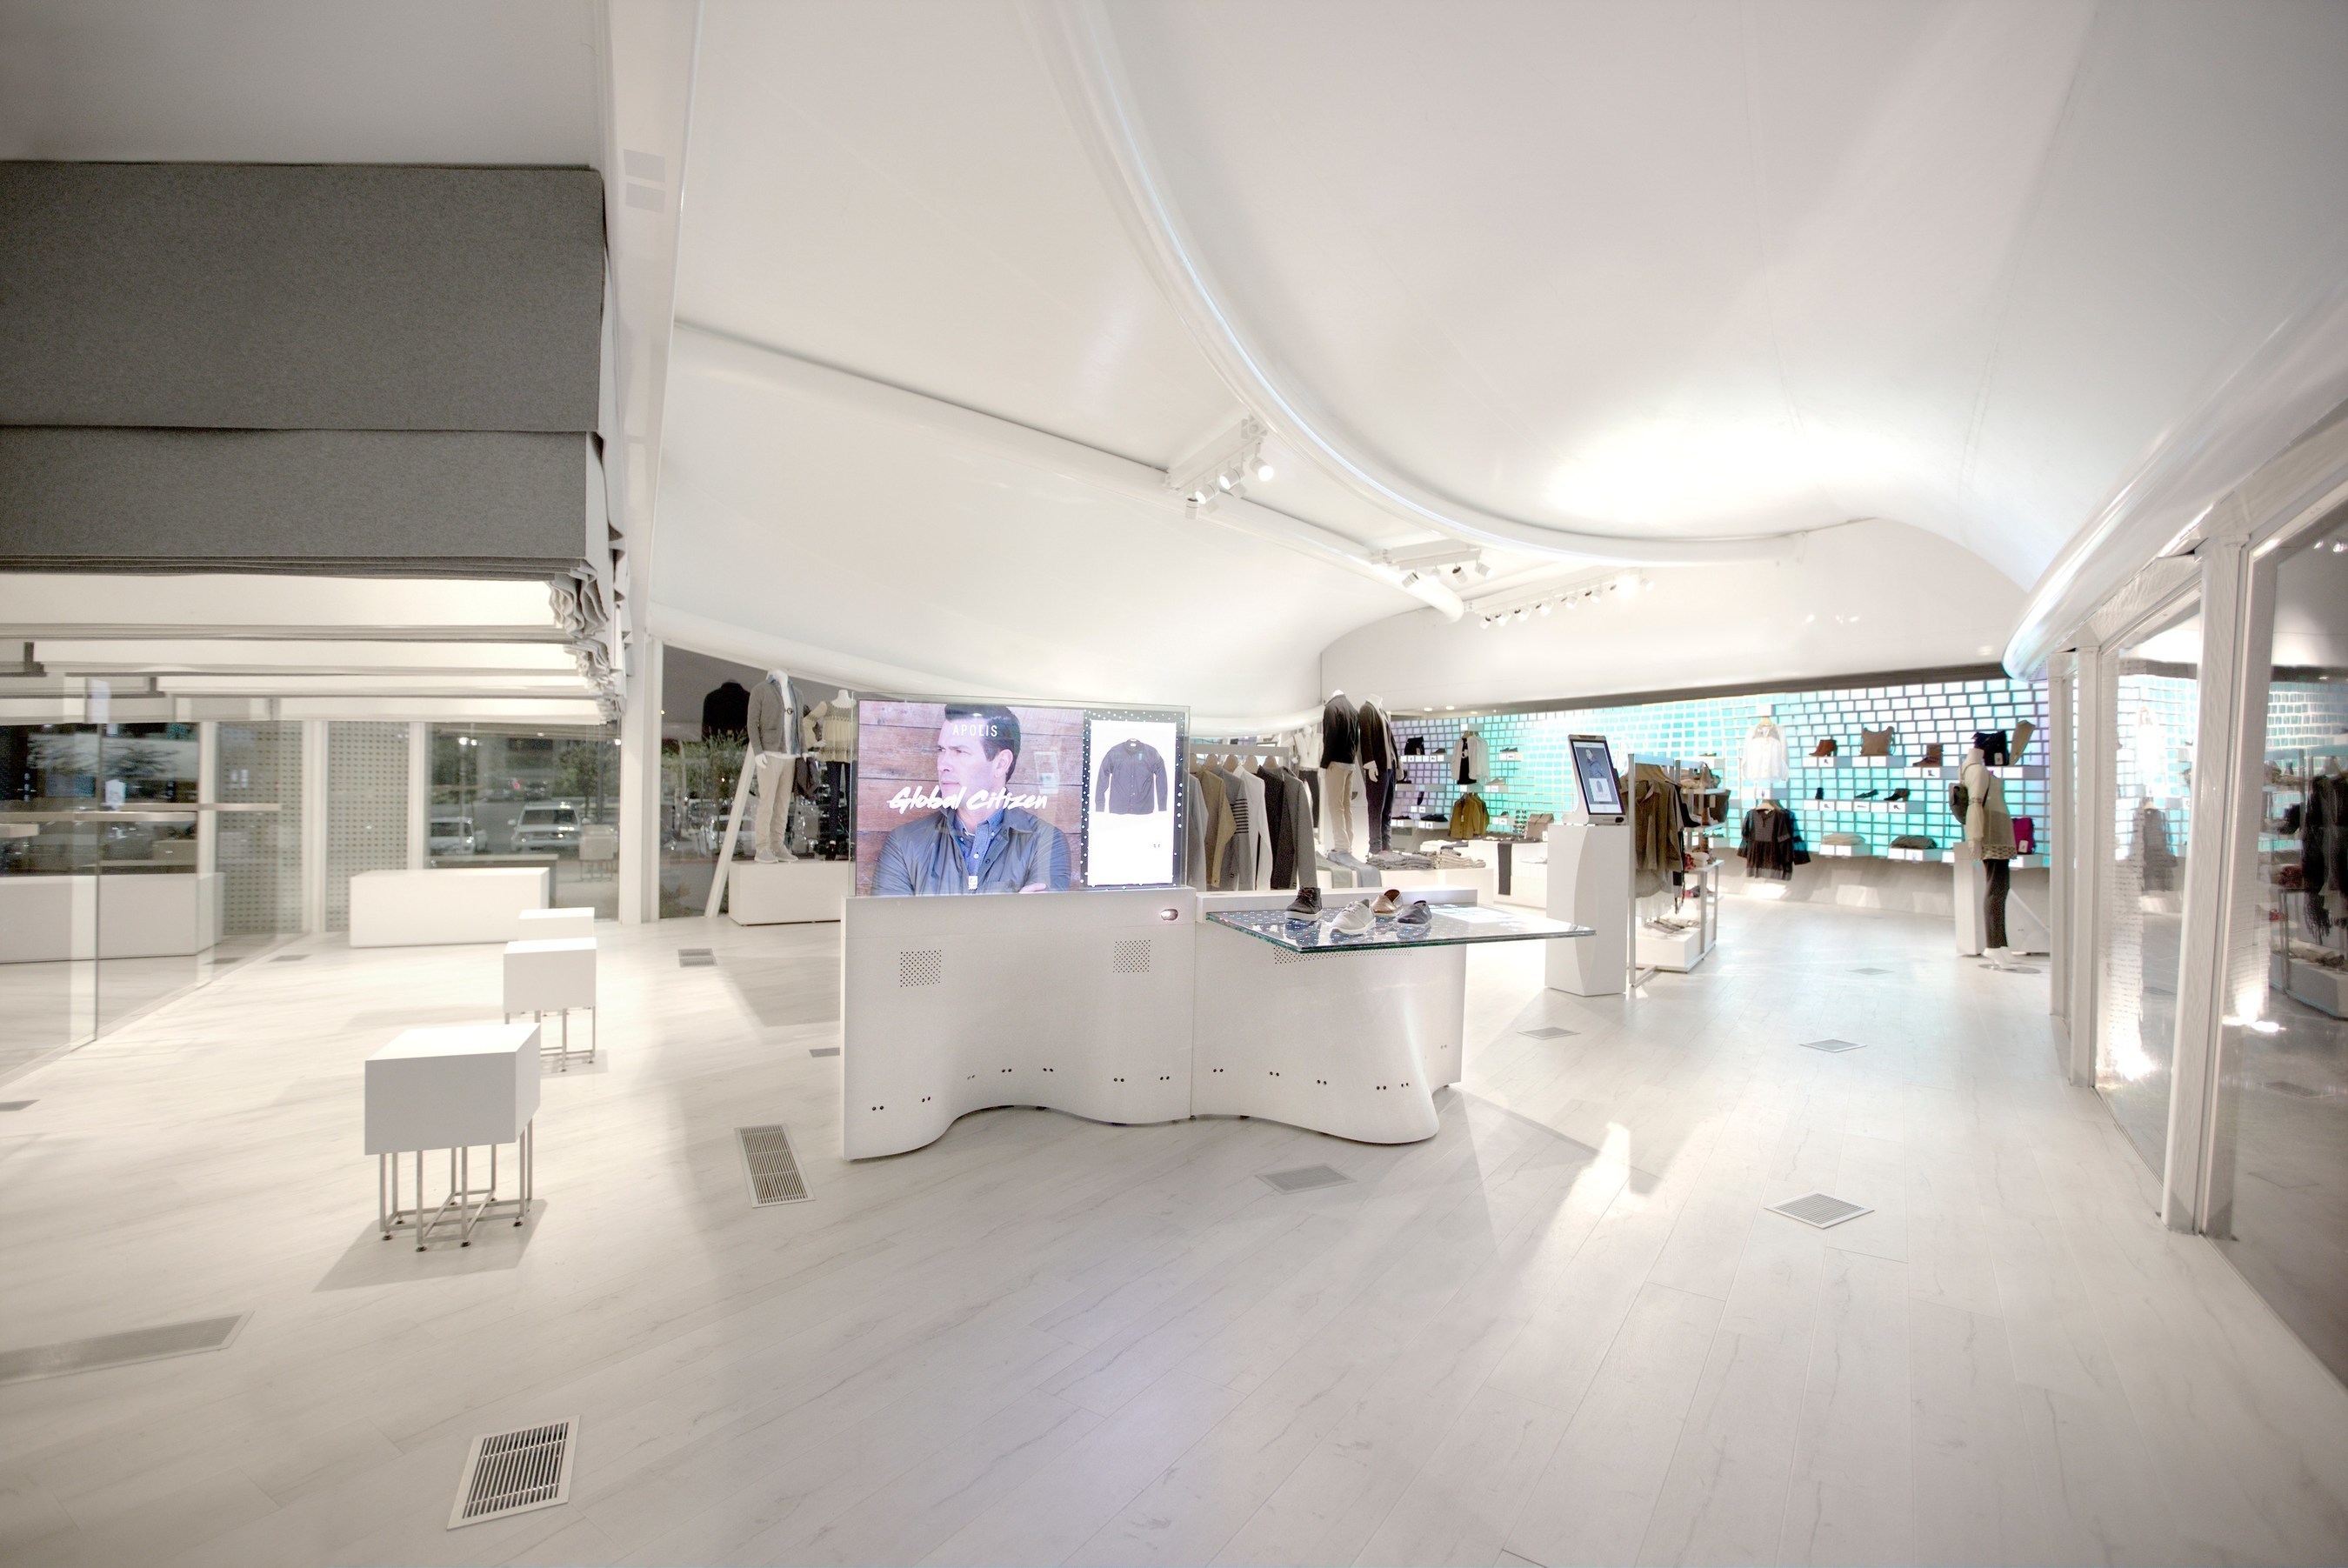 Macerich And WithMe(TM) Bring Transformative Smart Retail Concept To Santa Monica Place